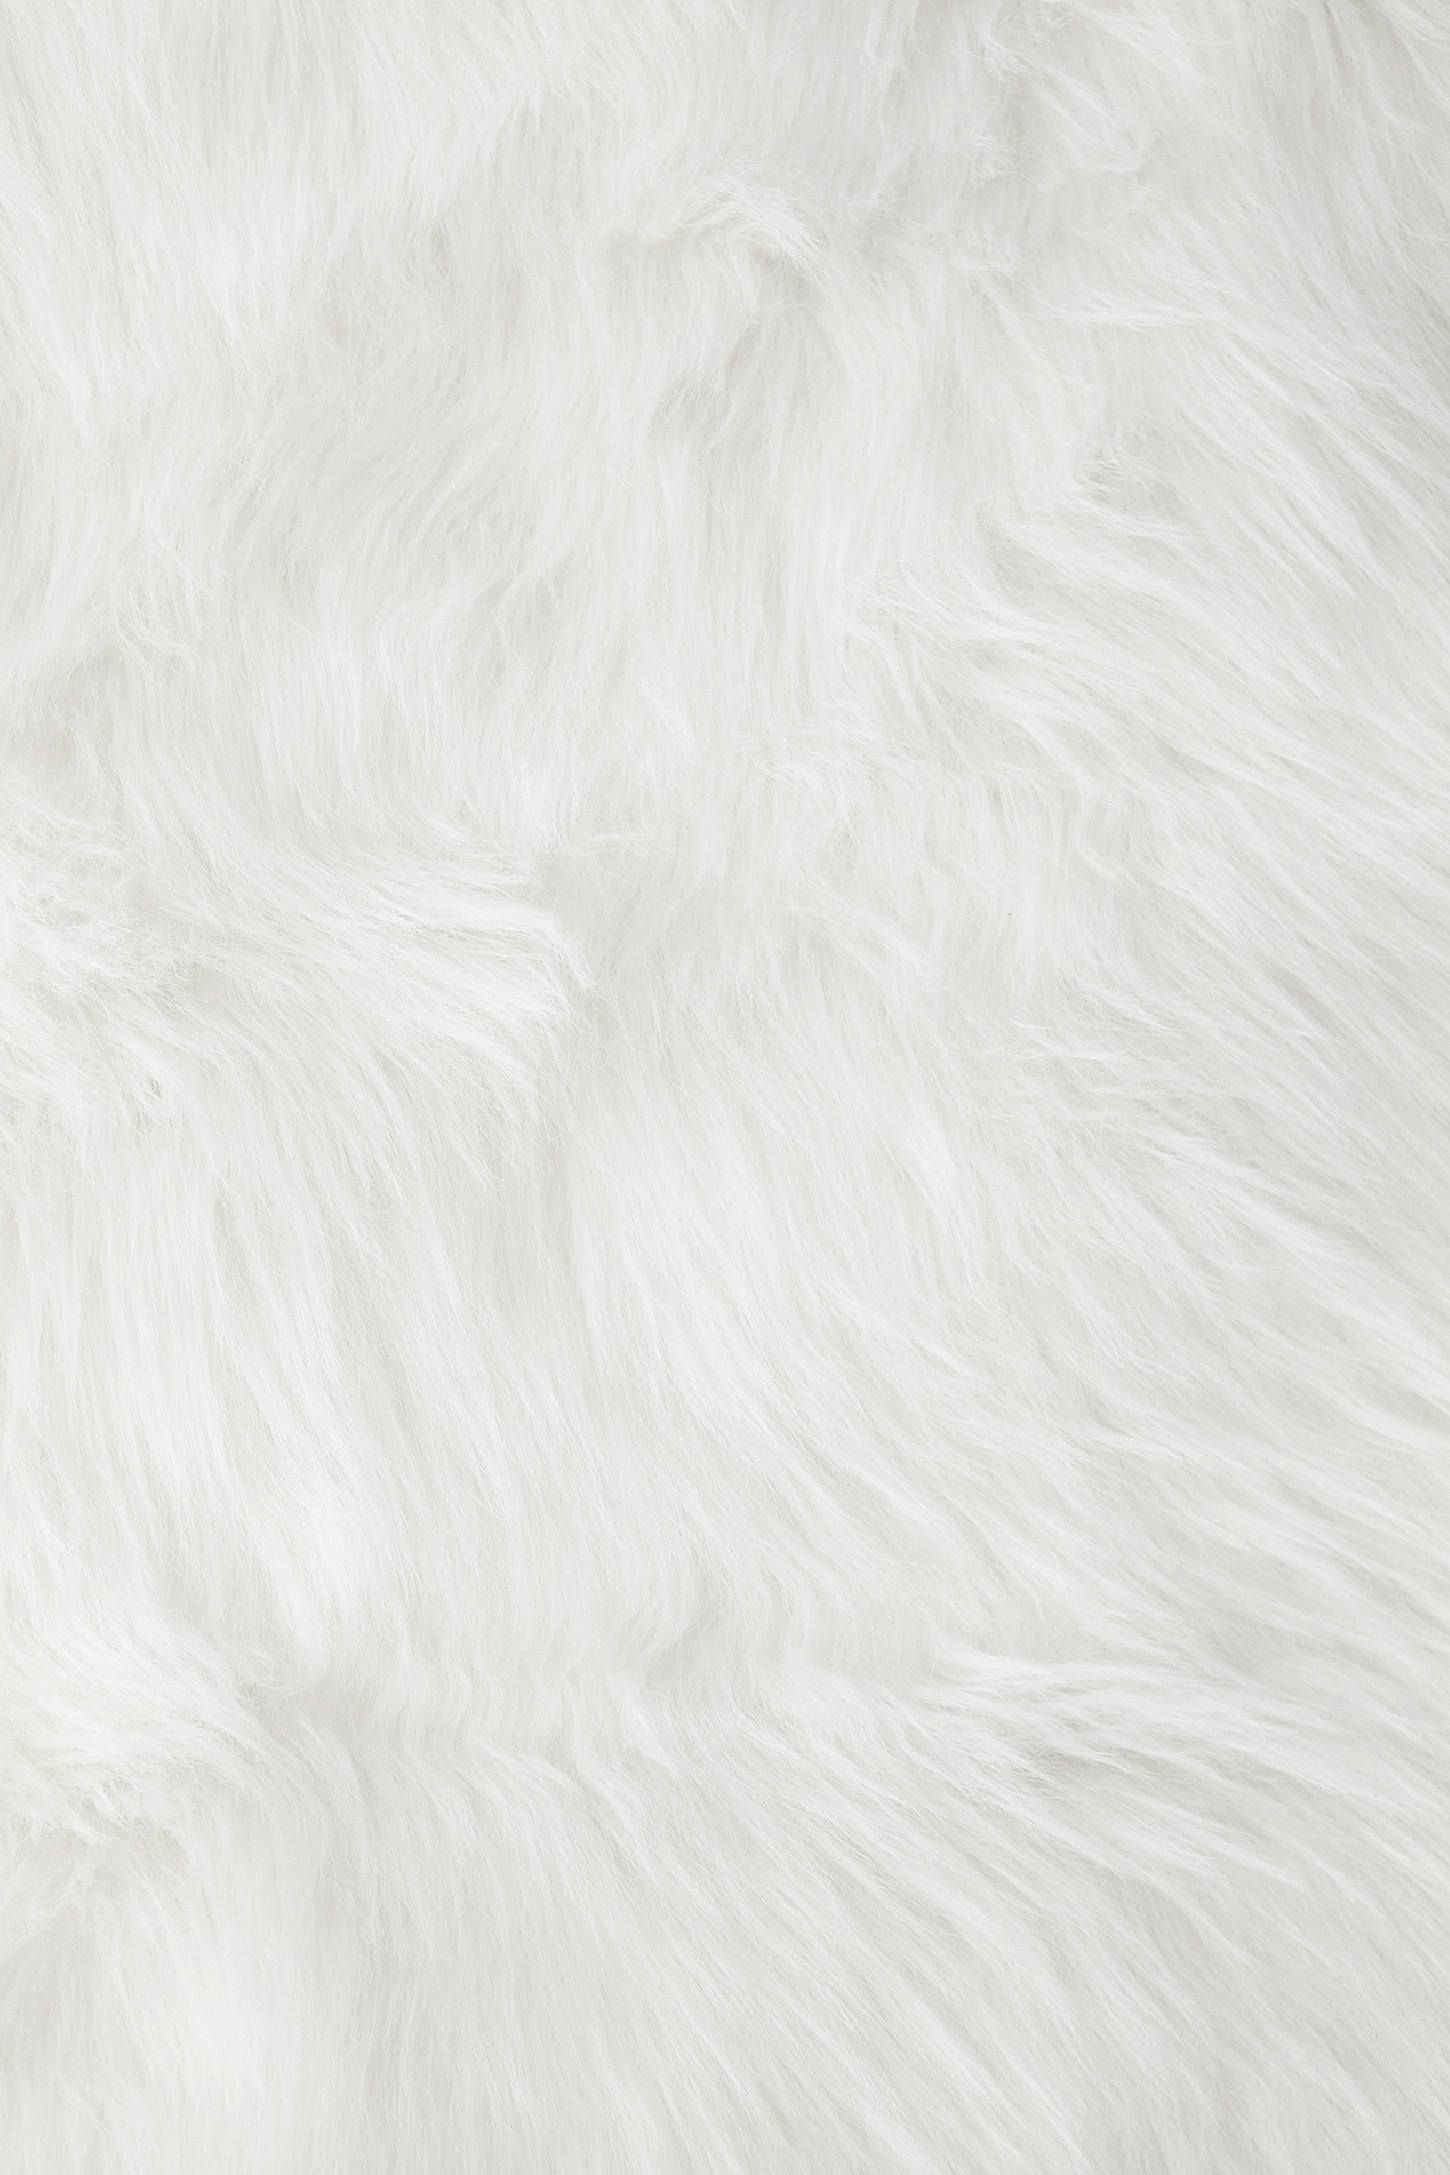 White fur background, Aesthetic design, Minimalist style, Soft and fluffy, 1450x2180 HD Handy